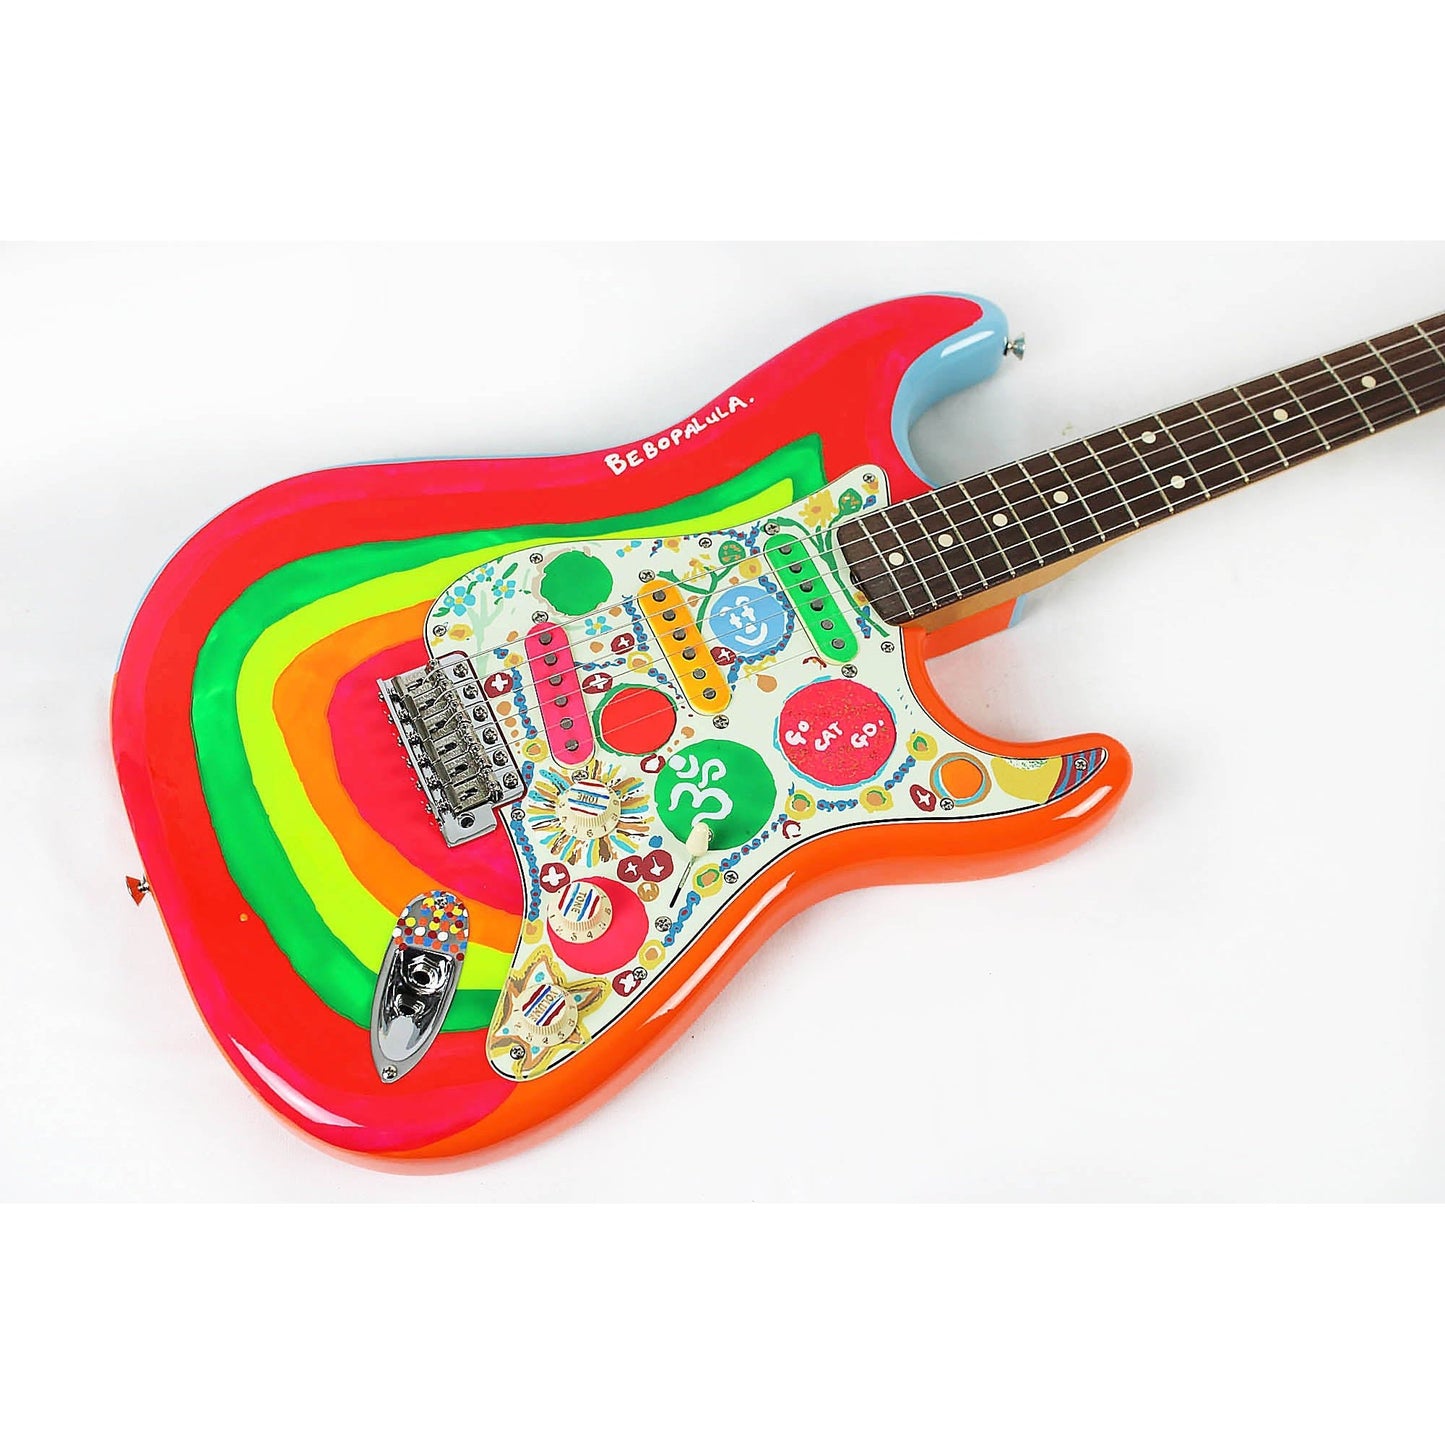 Fender George Harrison Rocky Stratocaster- Painted Rocky Finish - Leitz Music-885978982615-0140610772